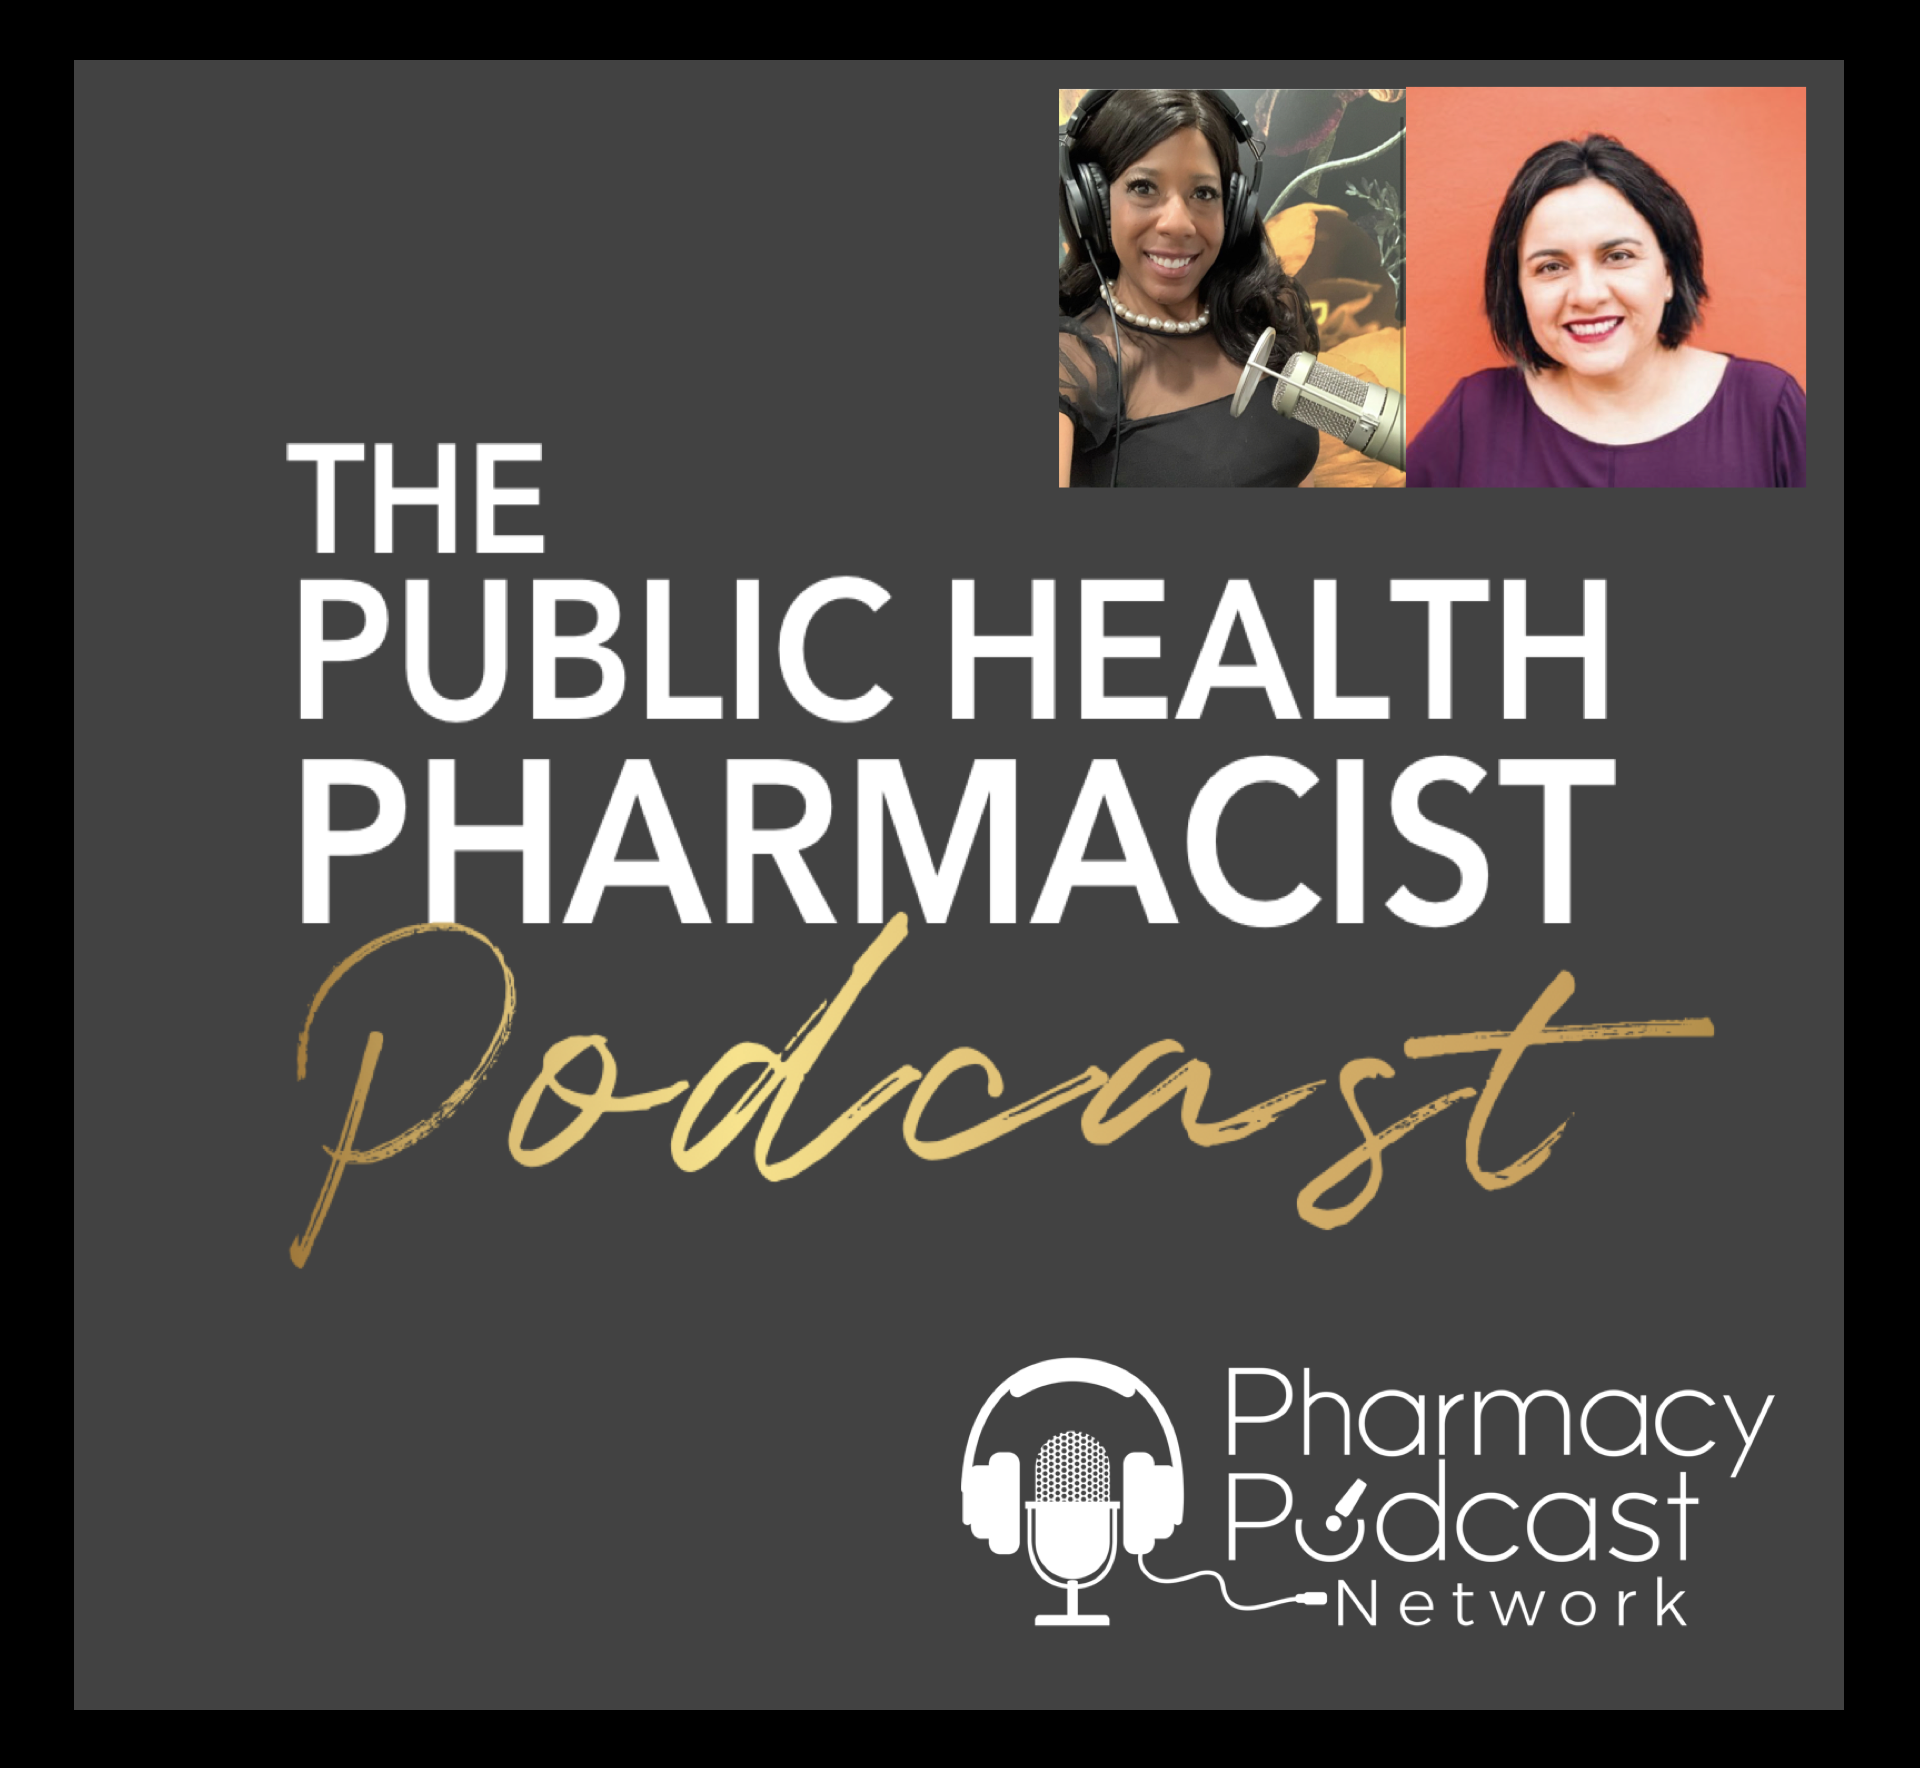 Leaders in Pharmacy Prioritizing Public Health - Words of Wisdom from the New President of the American Pharmacist Association (APhA)